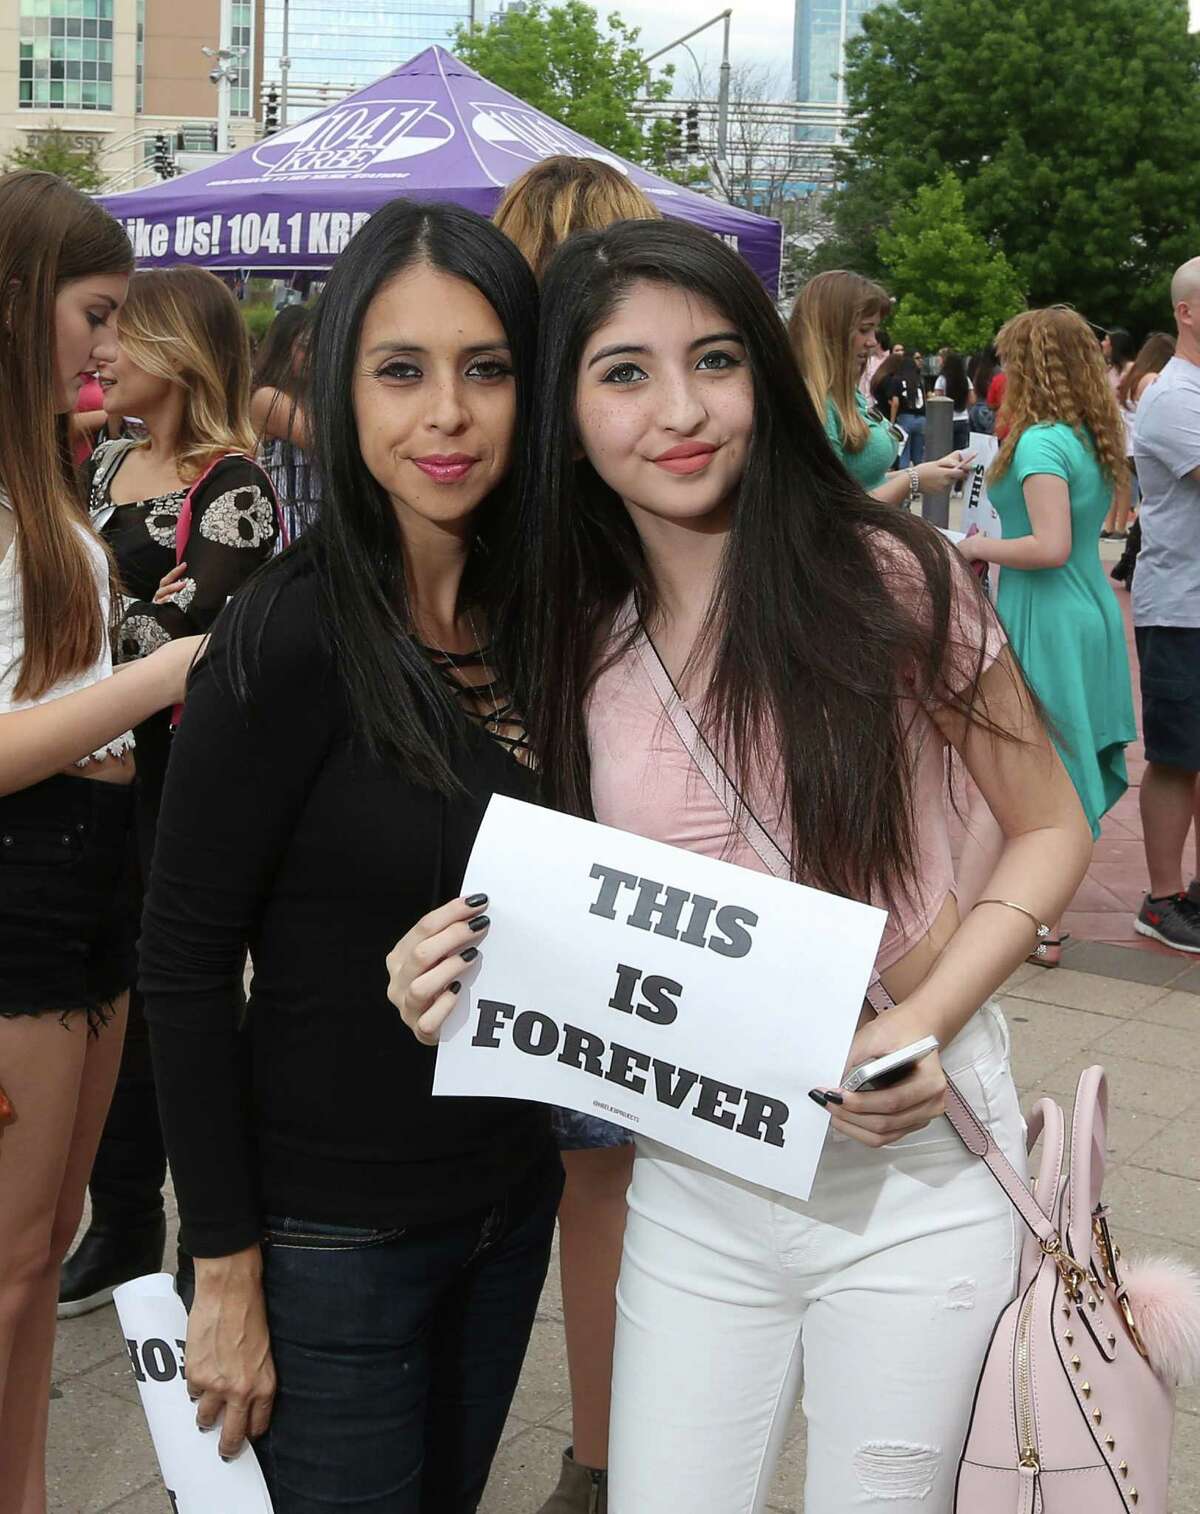 People pose for a photo before the Justin Bieber concert at the Toyota Center Saturday, April 9, 2016, in Houston.